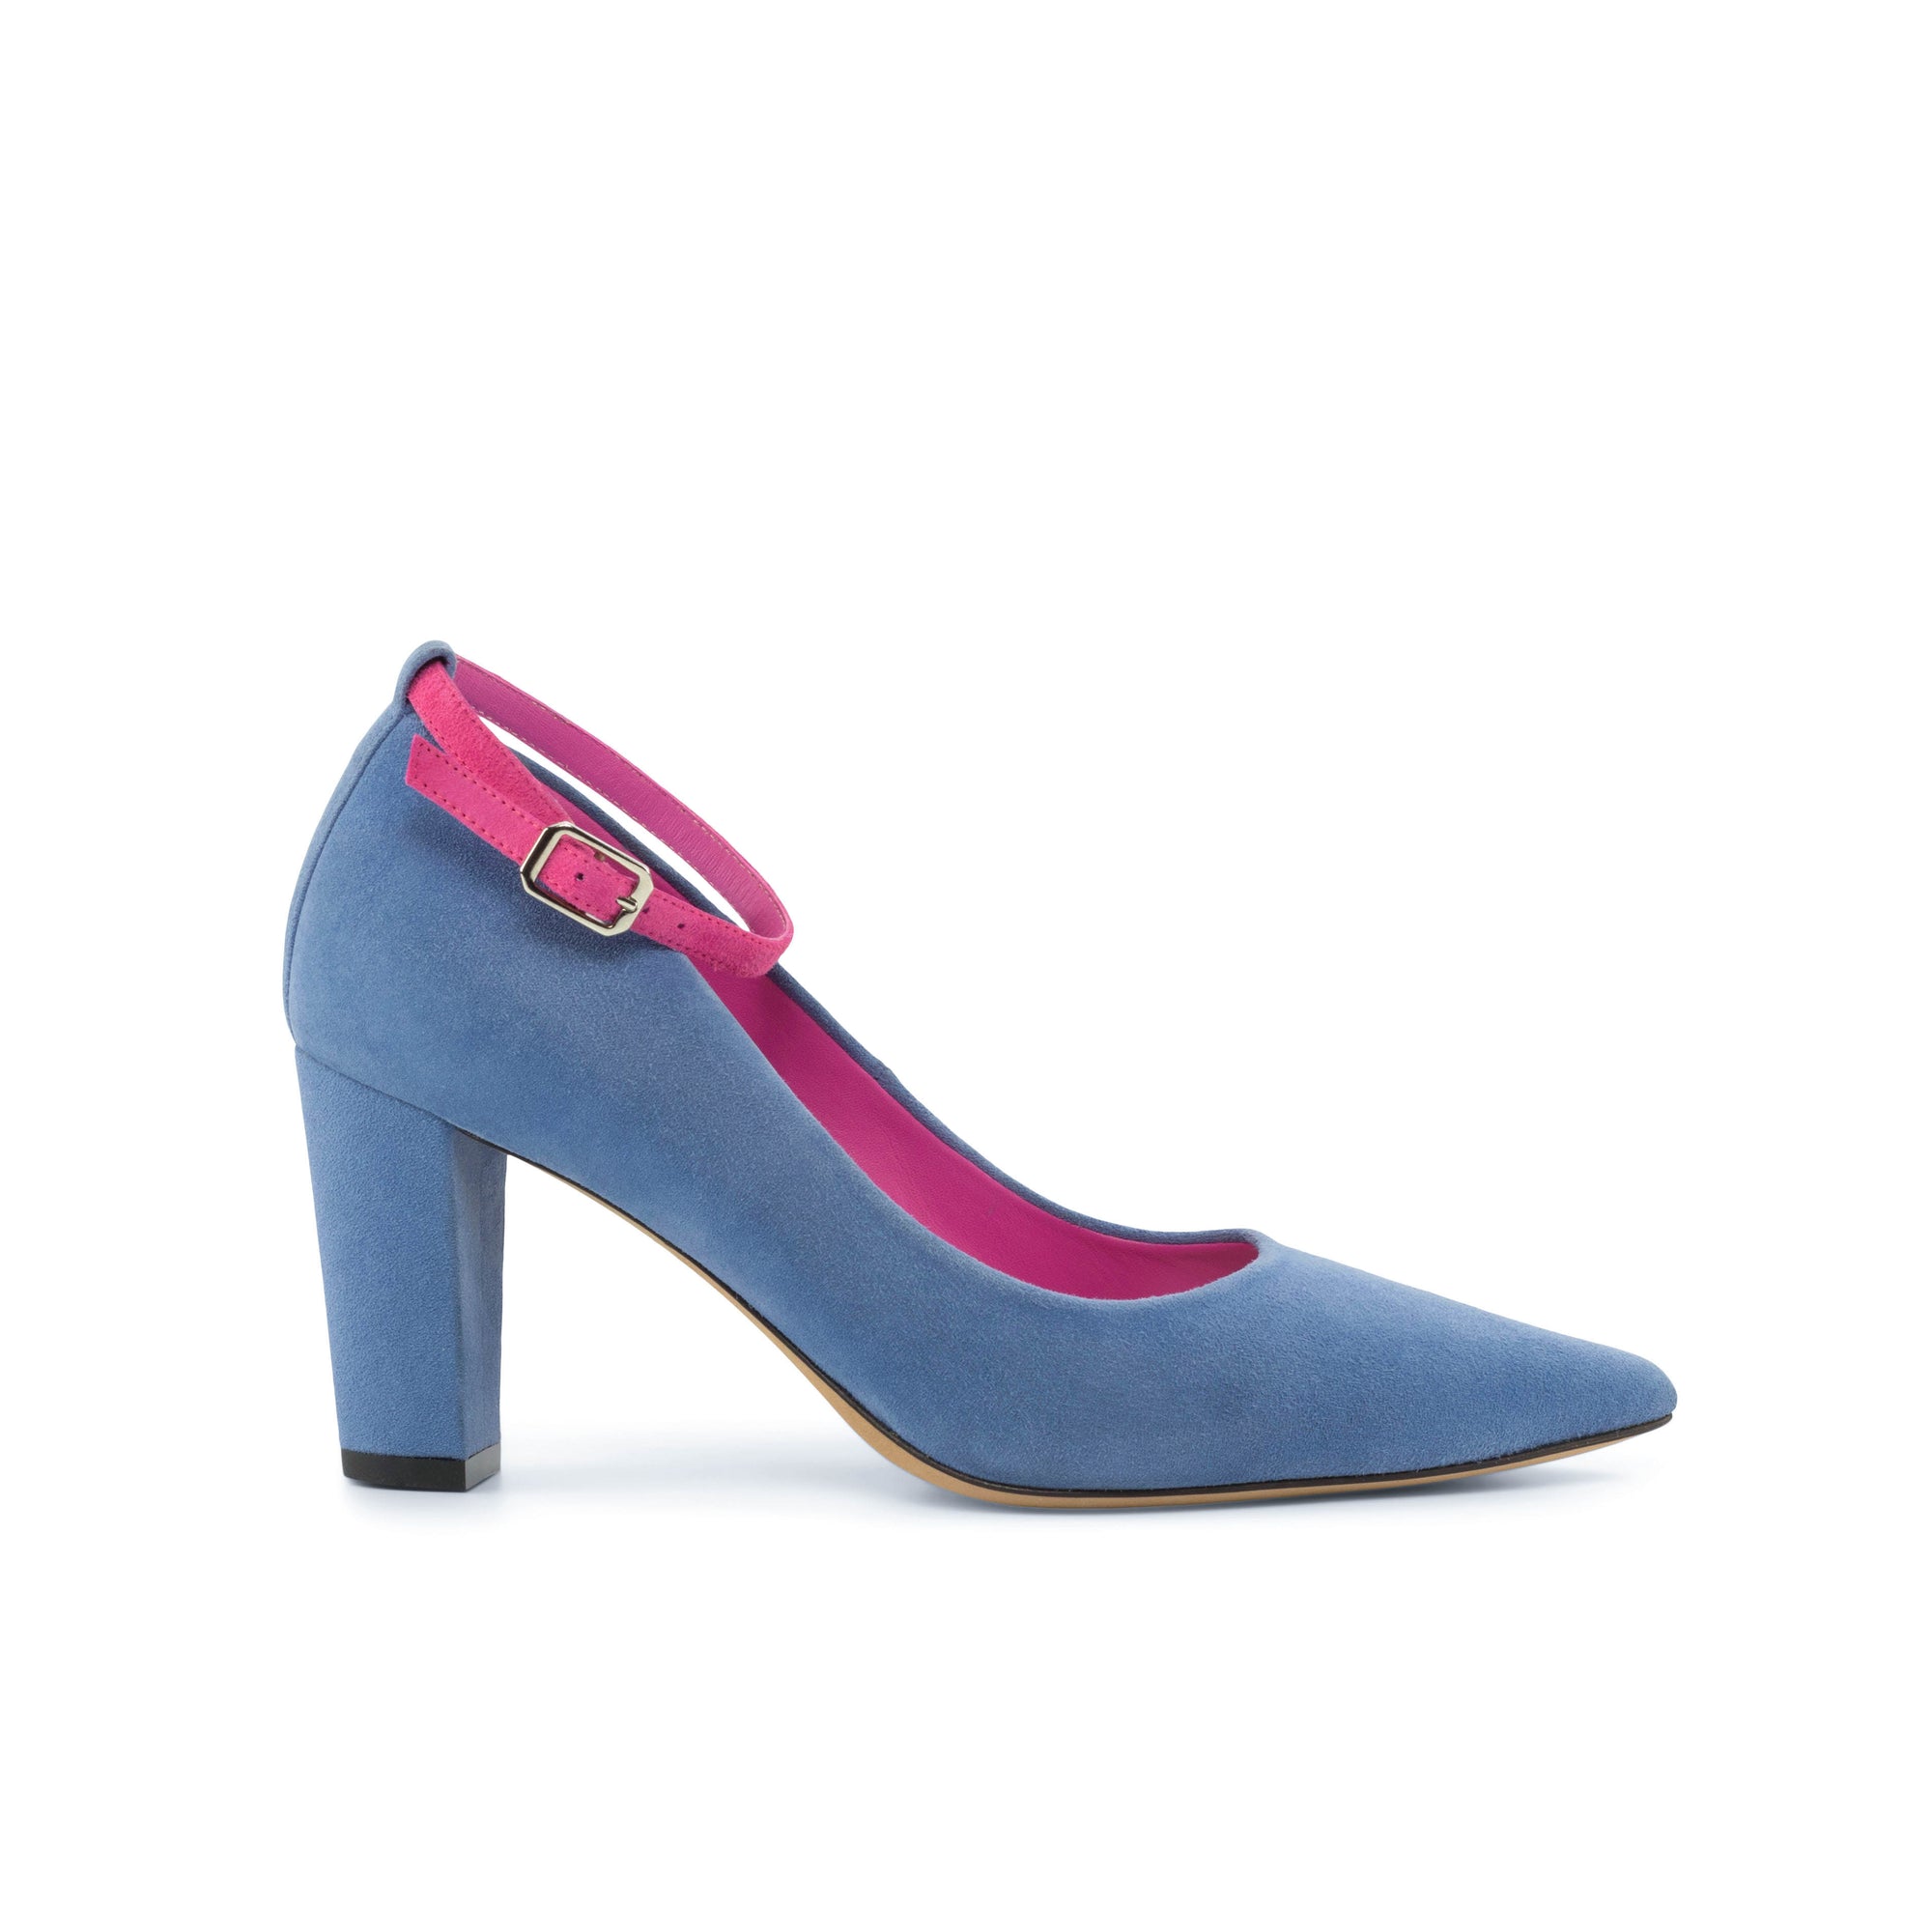 Blue and Fuschia Suede Block Heels - The Florence